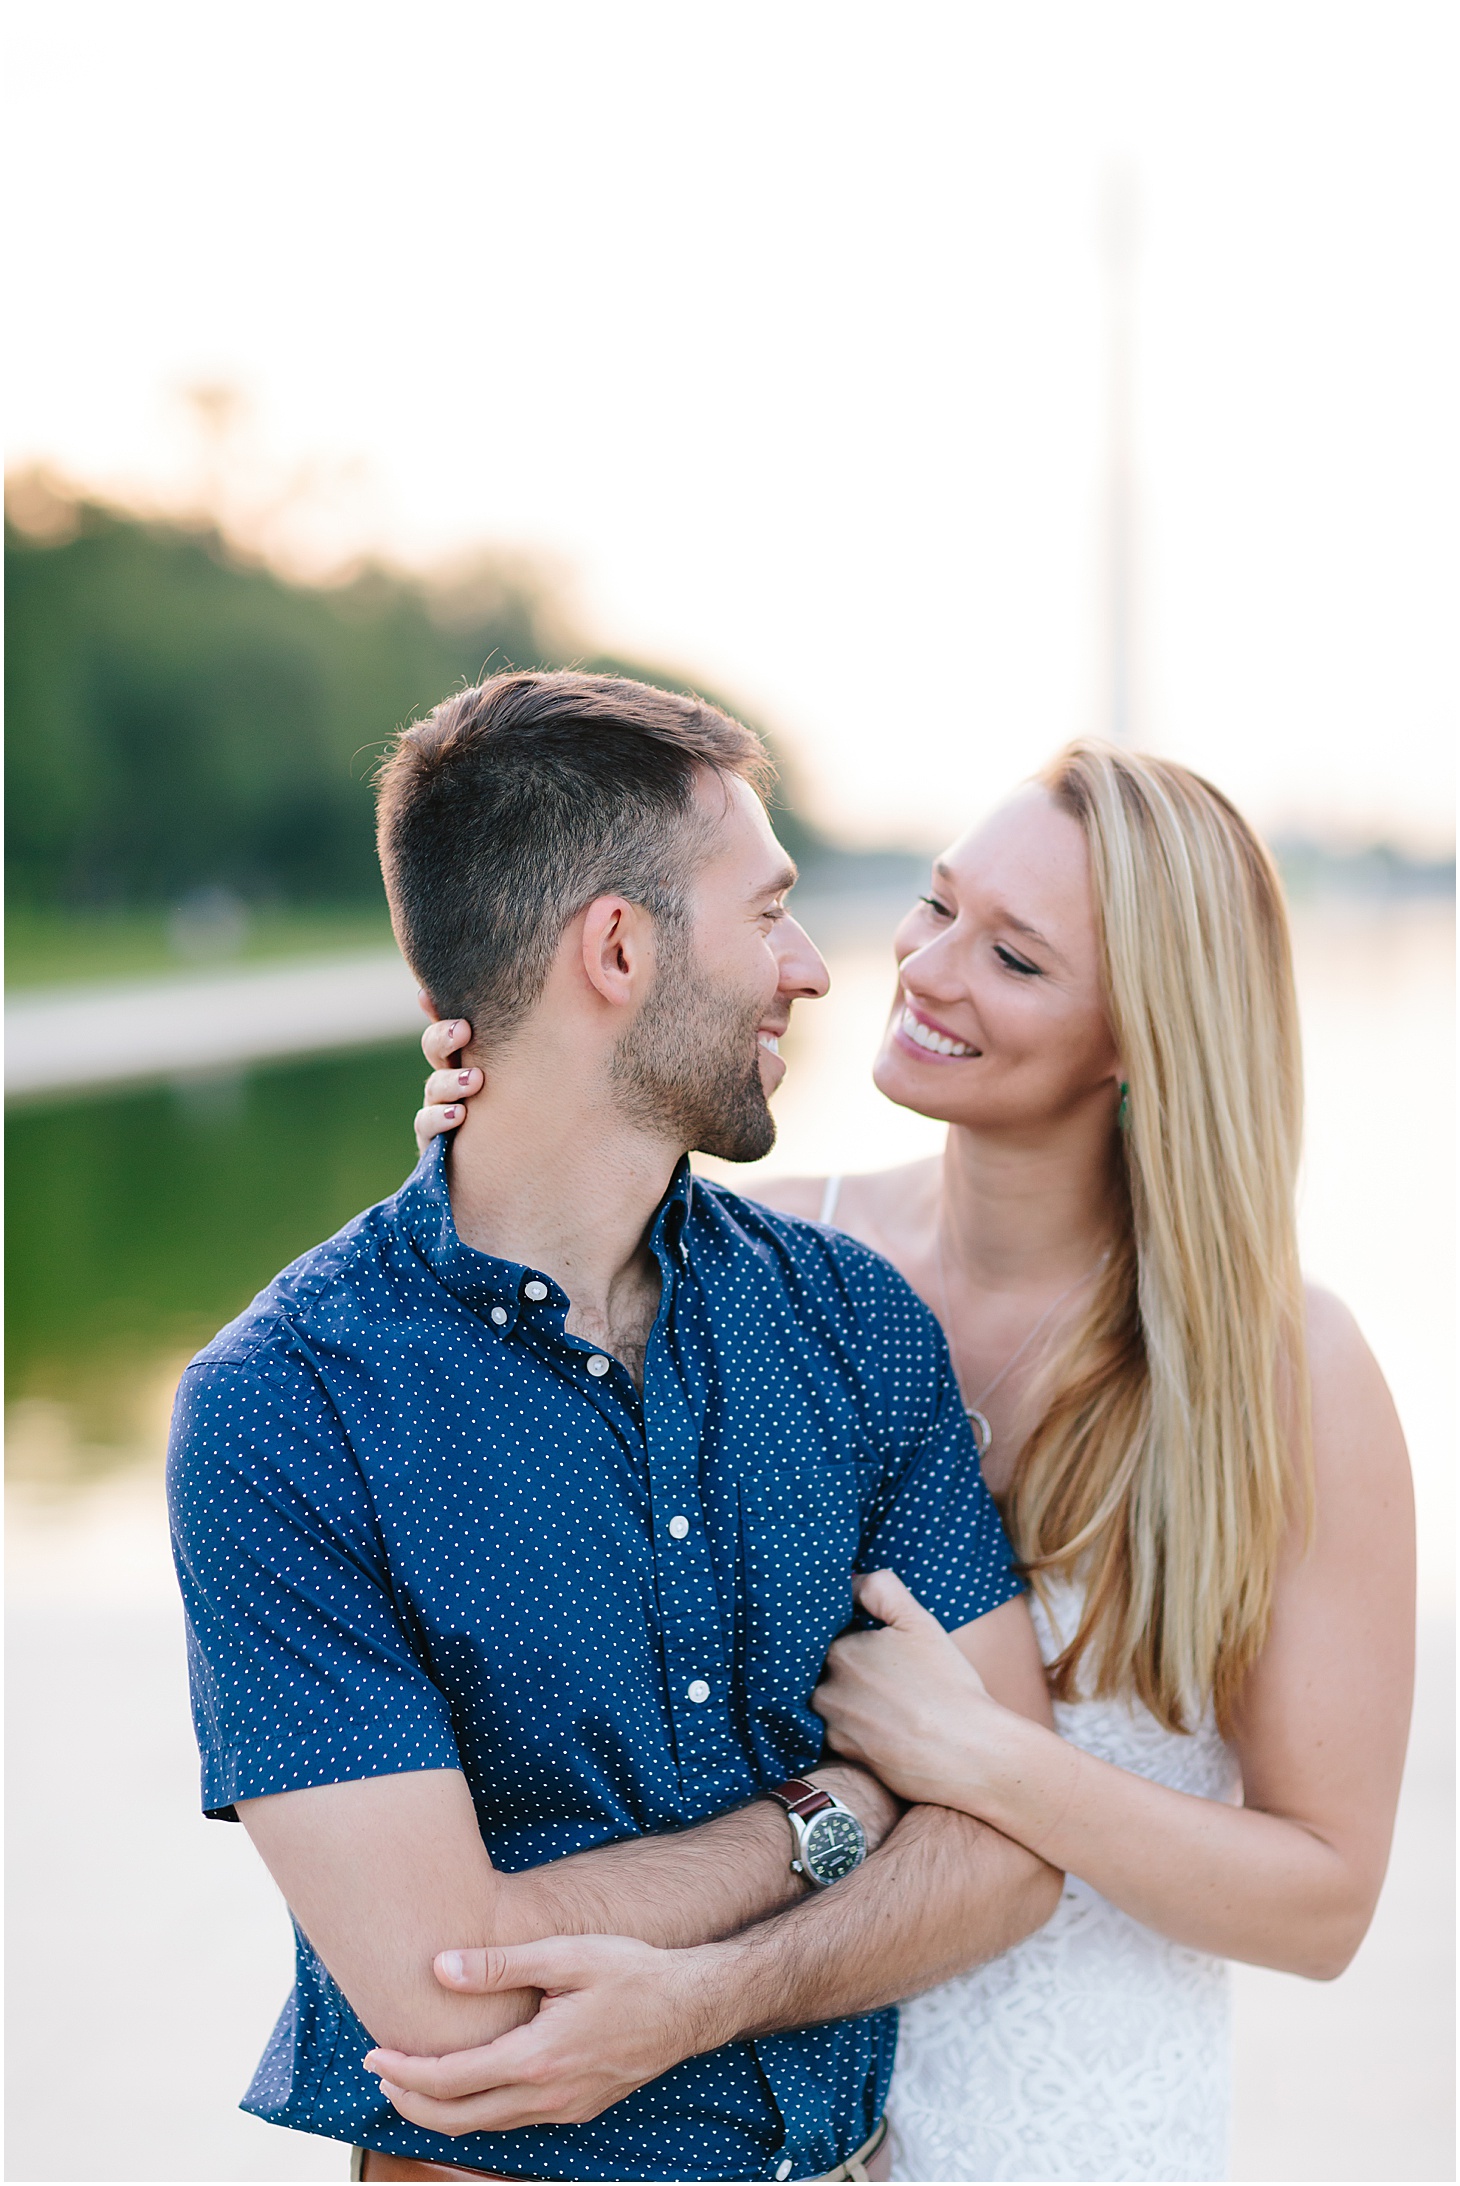 Sunrise Engagement Session in DC, Lincoln Memorial and Woodley Park Engagement Session, Sarah Bradshaw Photography, DC Wedding Photographer